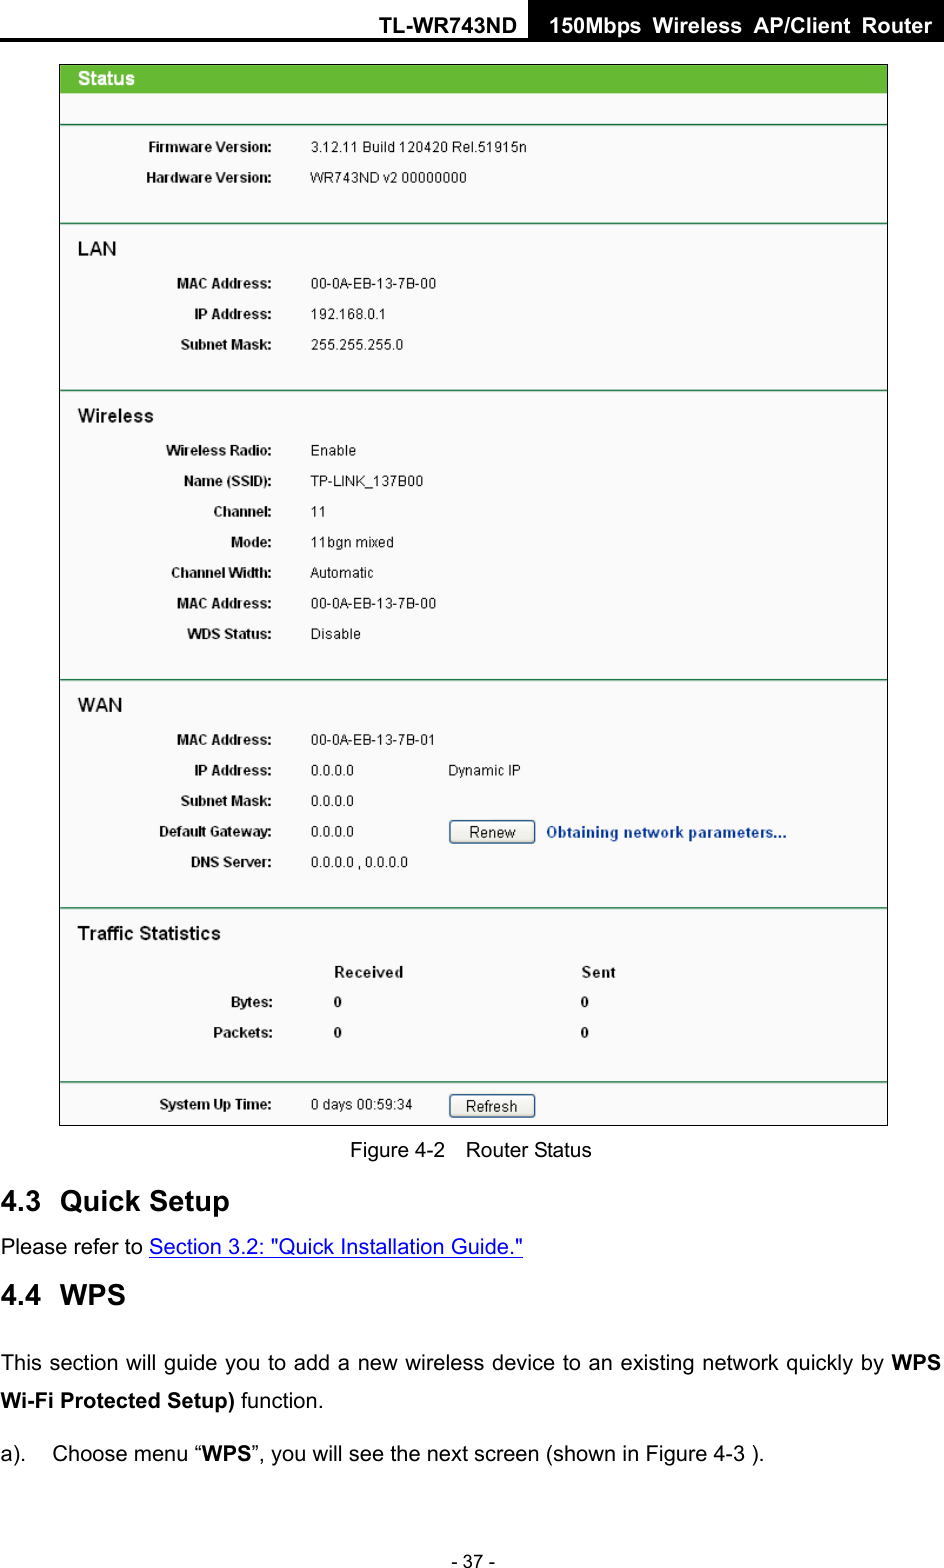 TL-WR743ND 150Mbps Wireless AP/Client Router - 37 -  Figure 4-2    Router Status 4.3  Quick Setup Please refer to Section 3.2: &quot;Quick Installation Guide.&quot; 4.4  WPS This section will guide you to add a new wireless device to an existing network quickly by WPS Wi-Fi Protected Setup) function.   a).  Choose menu “WPS”, you will see the next screen (shown in Figure 4-3 ).   